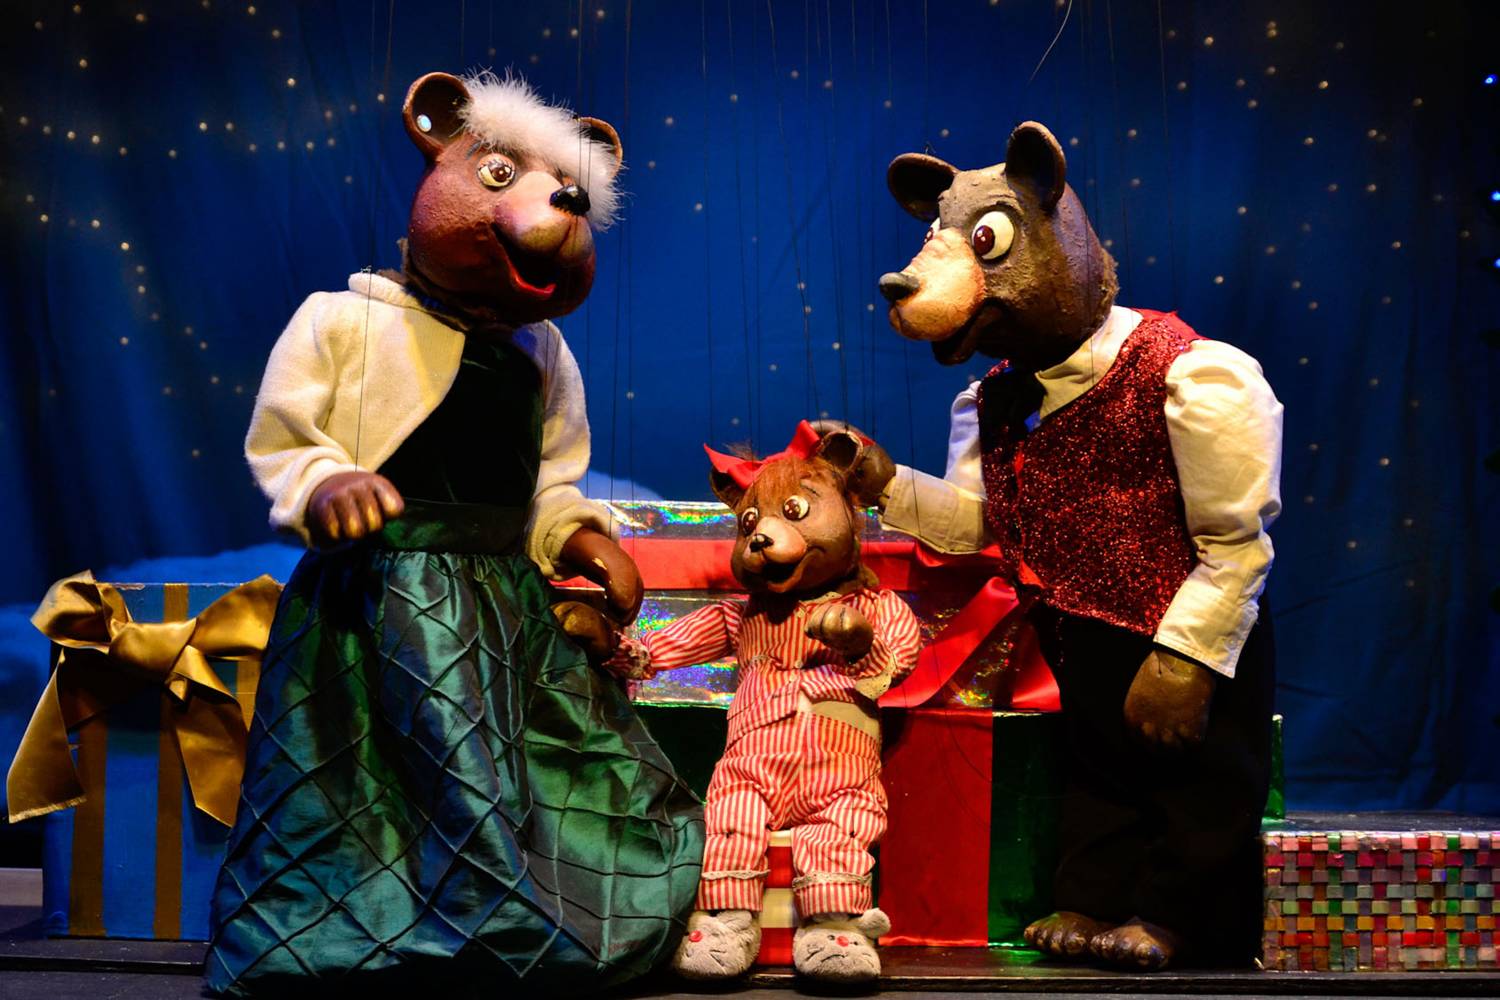 The Three Bears Holiday Bash Marionette Show